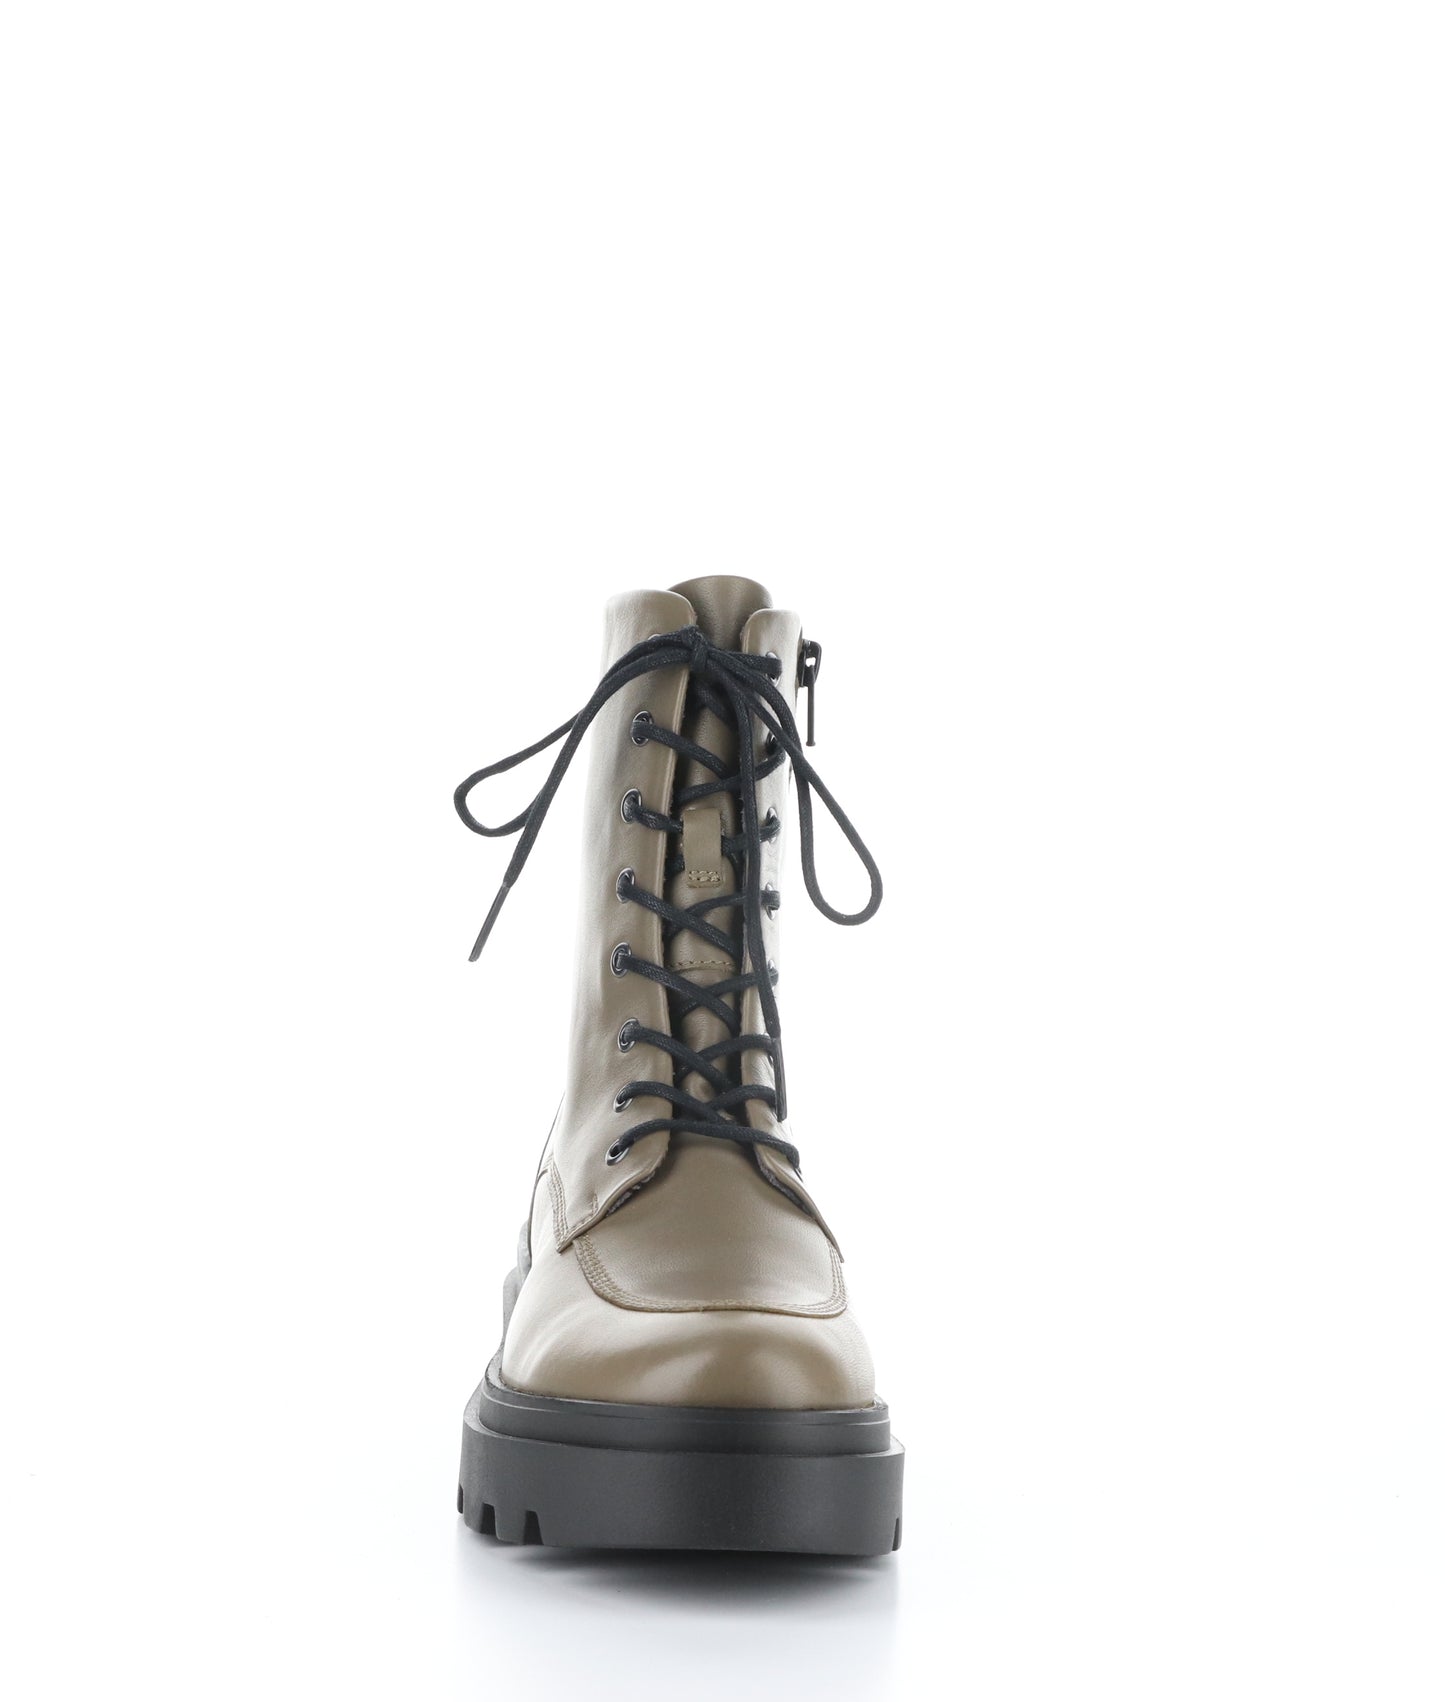 The front view of a taupe coloured, army style boot with black lace up detail and a lug sole.